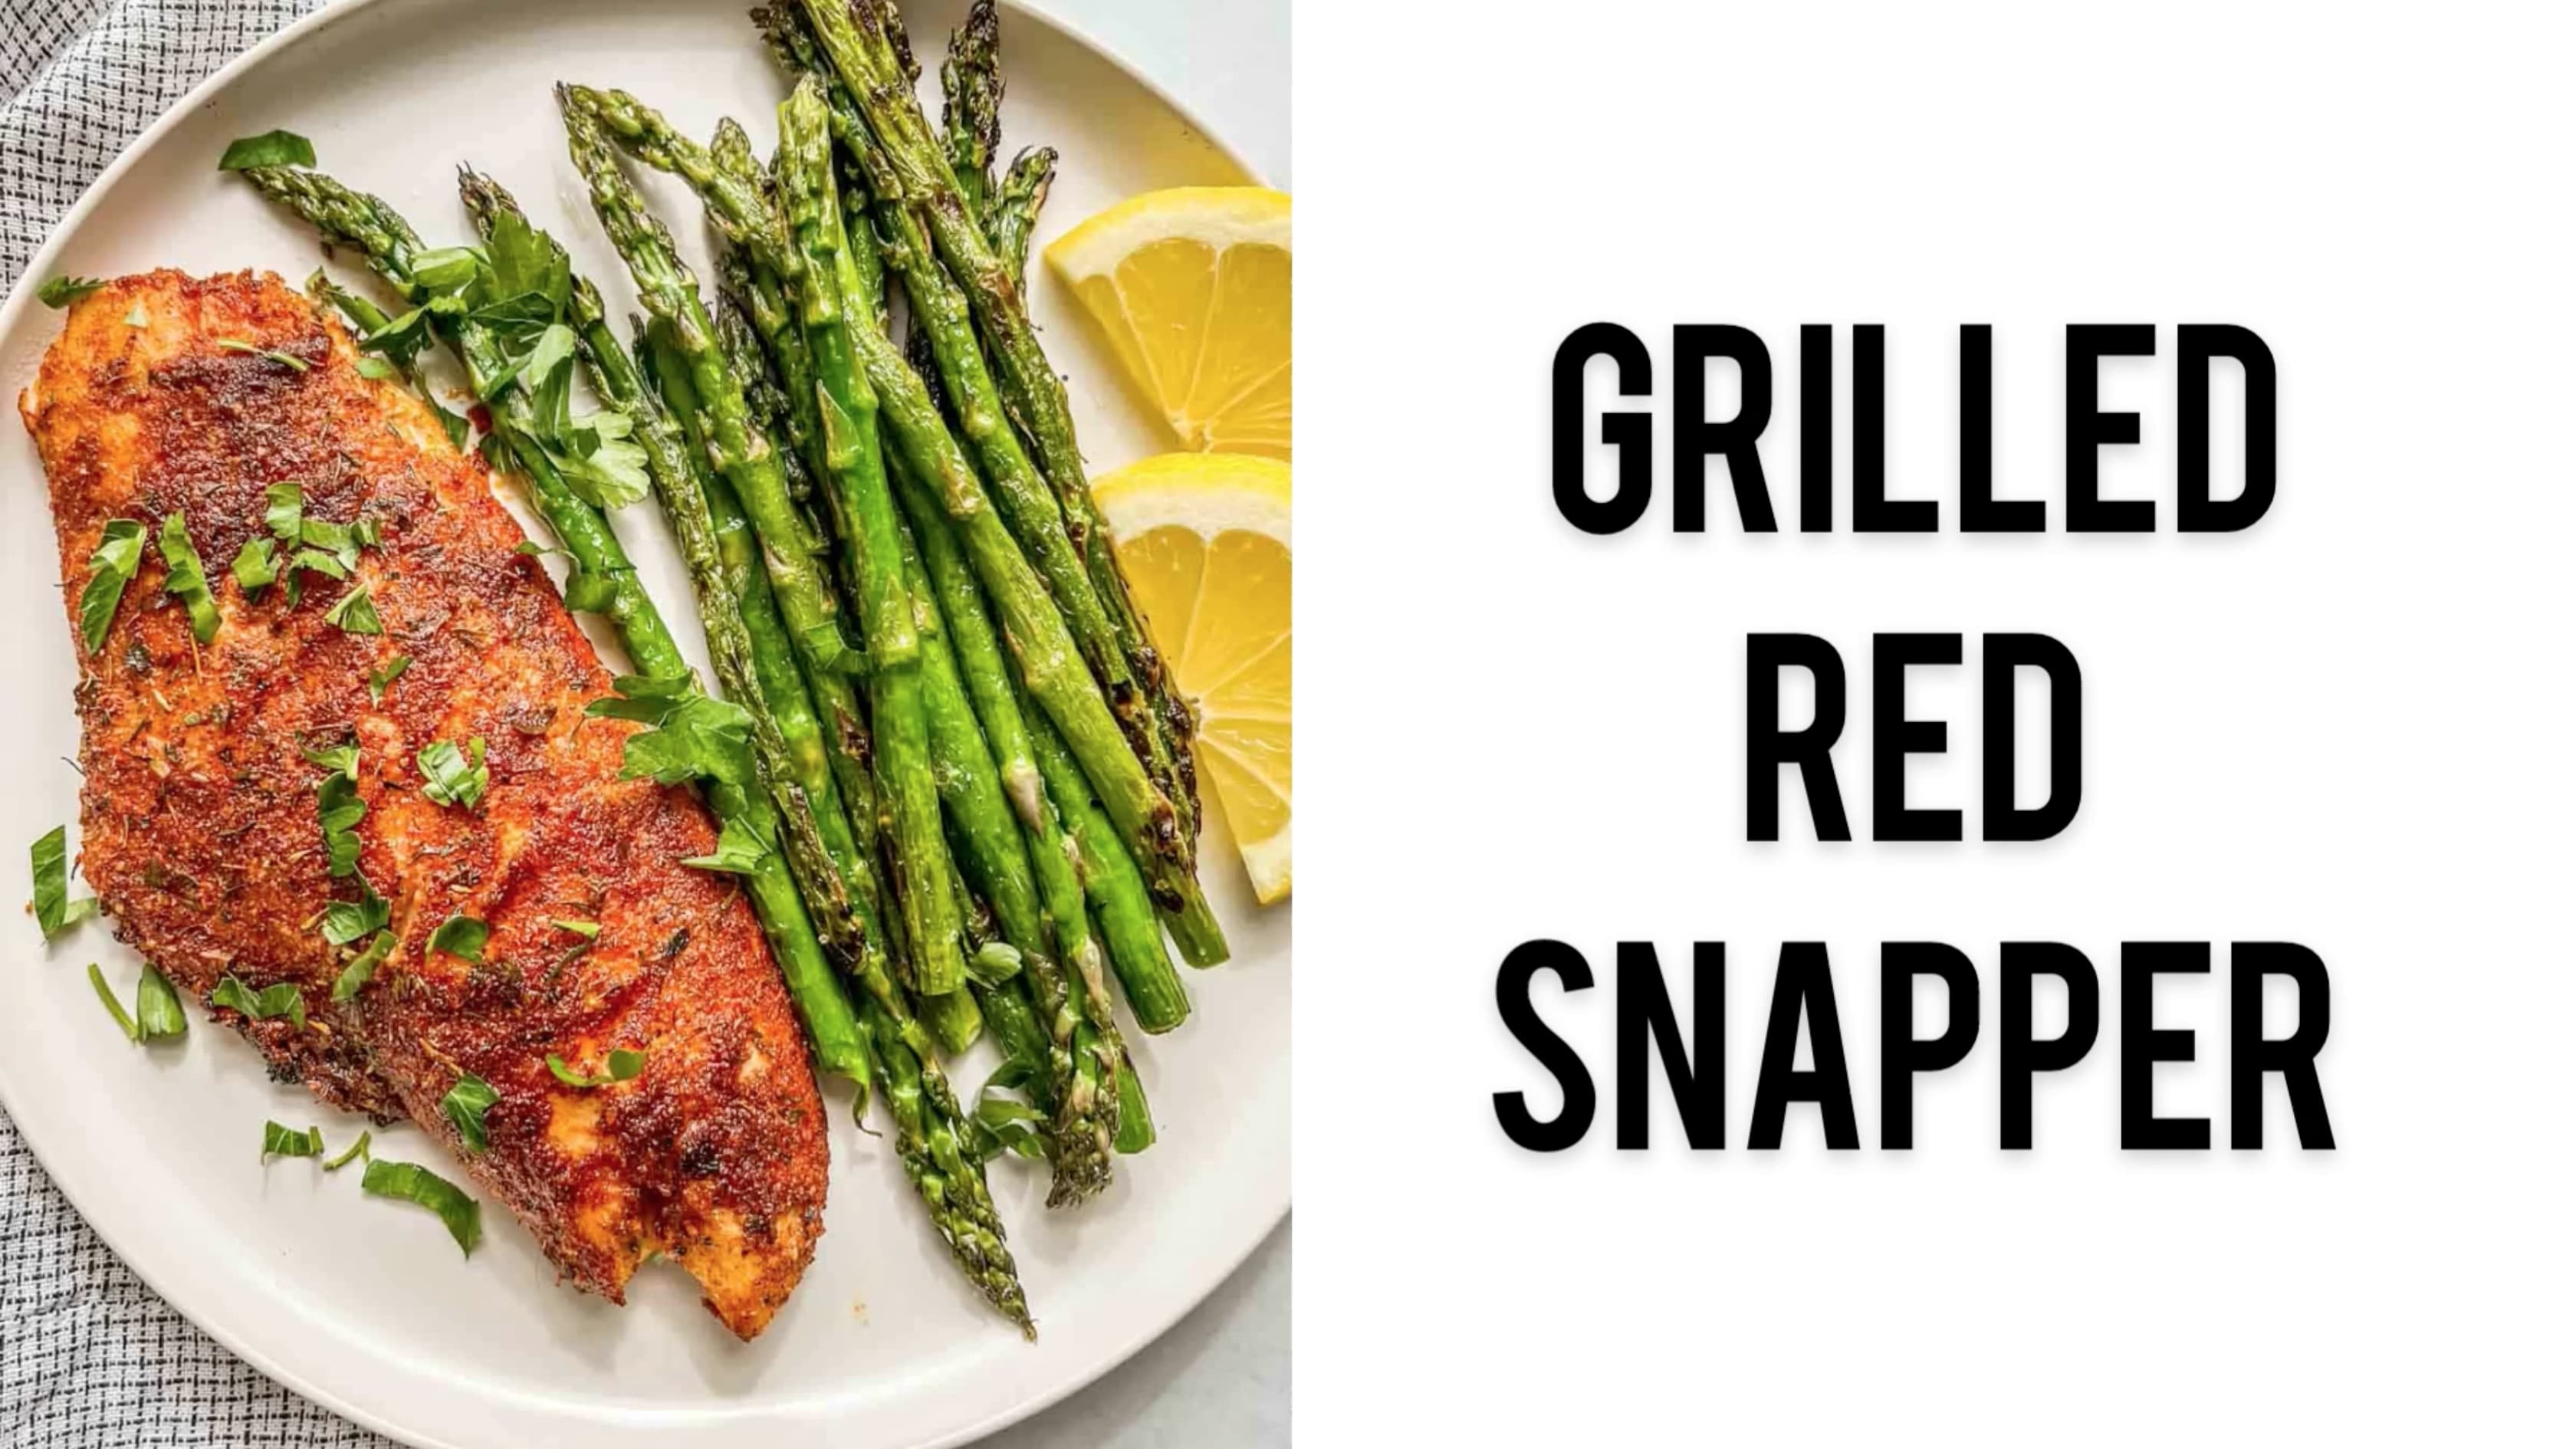 Best Grilled Red Snapper - How To Make Grilled Red Snapper